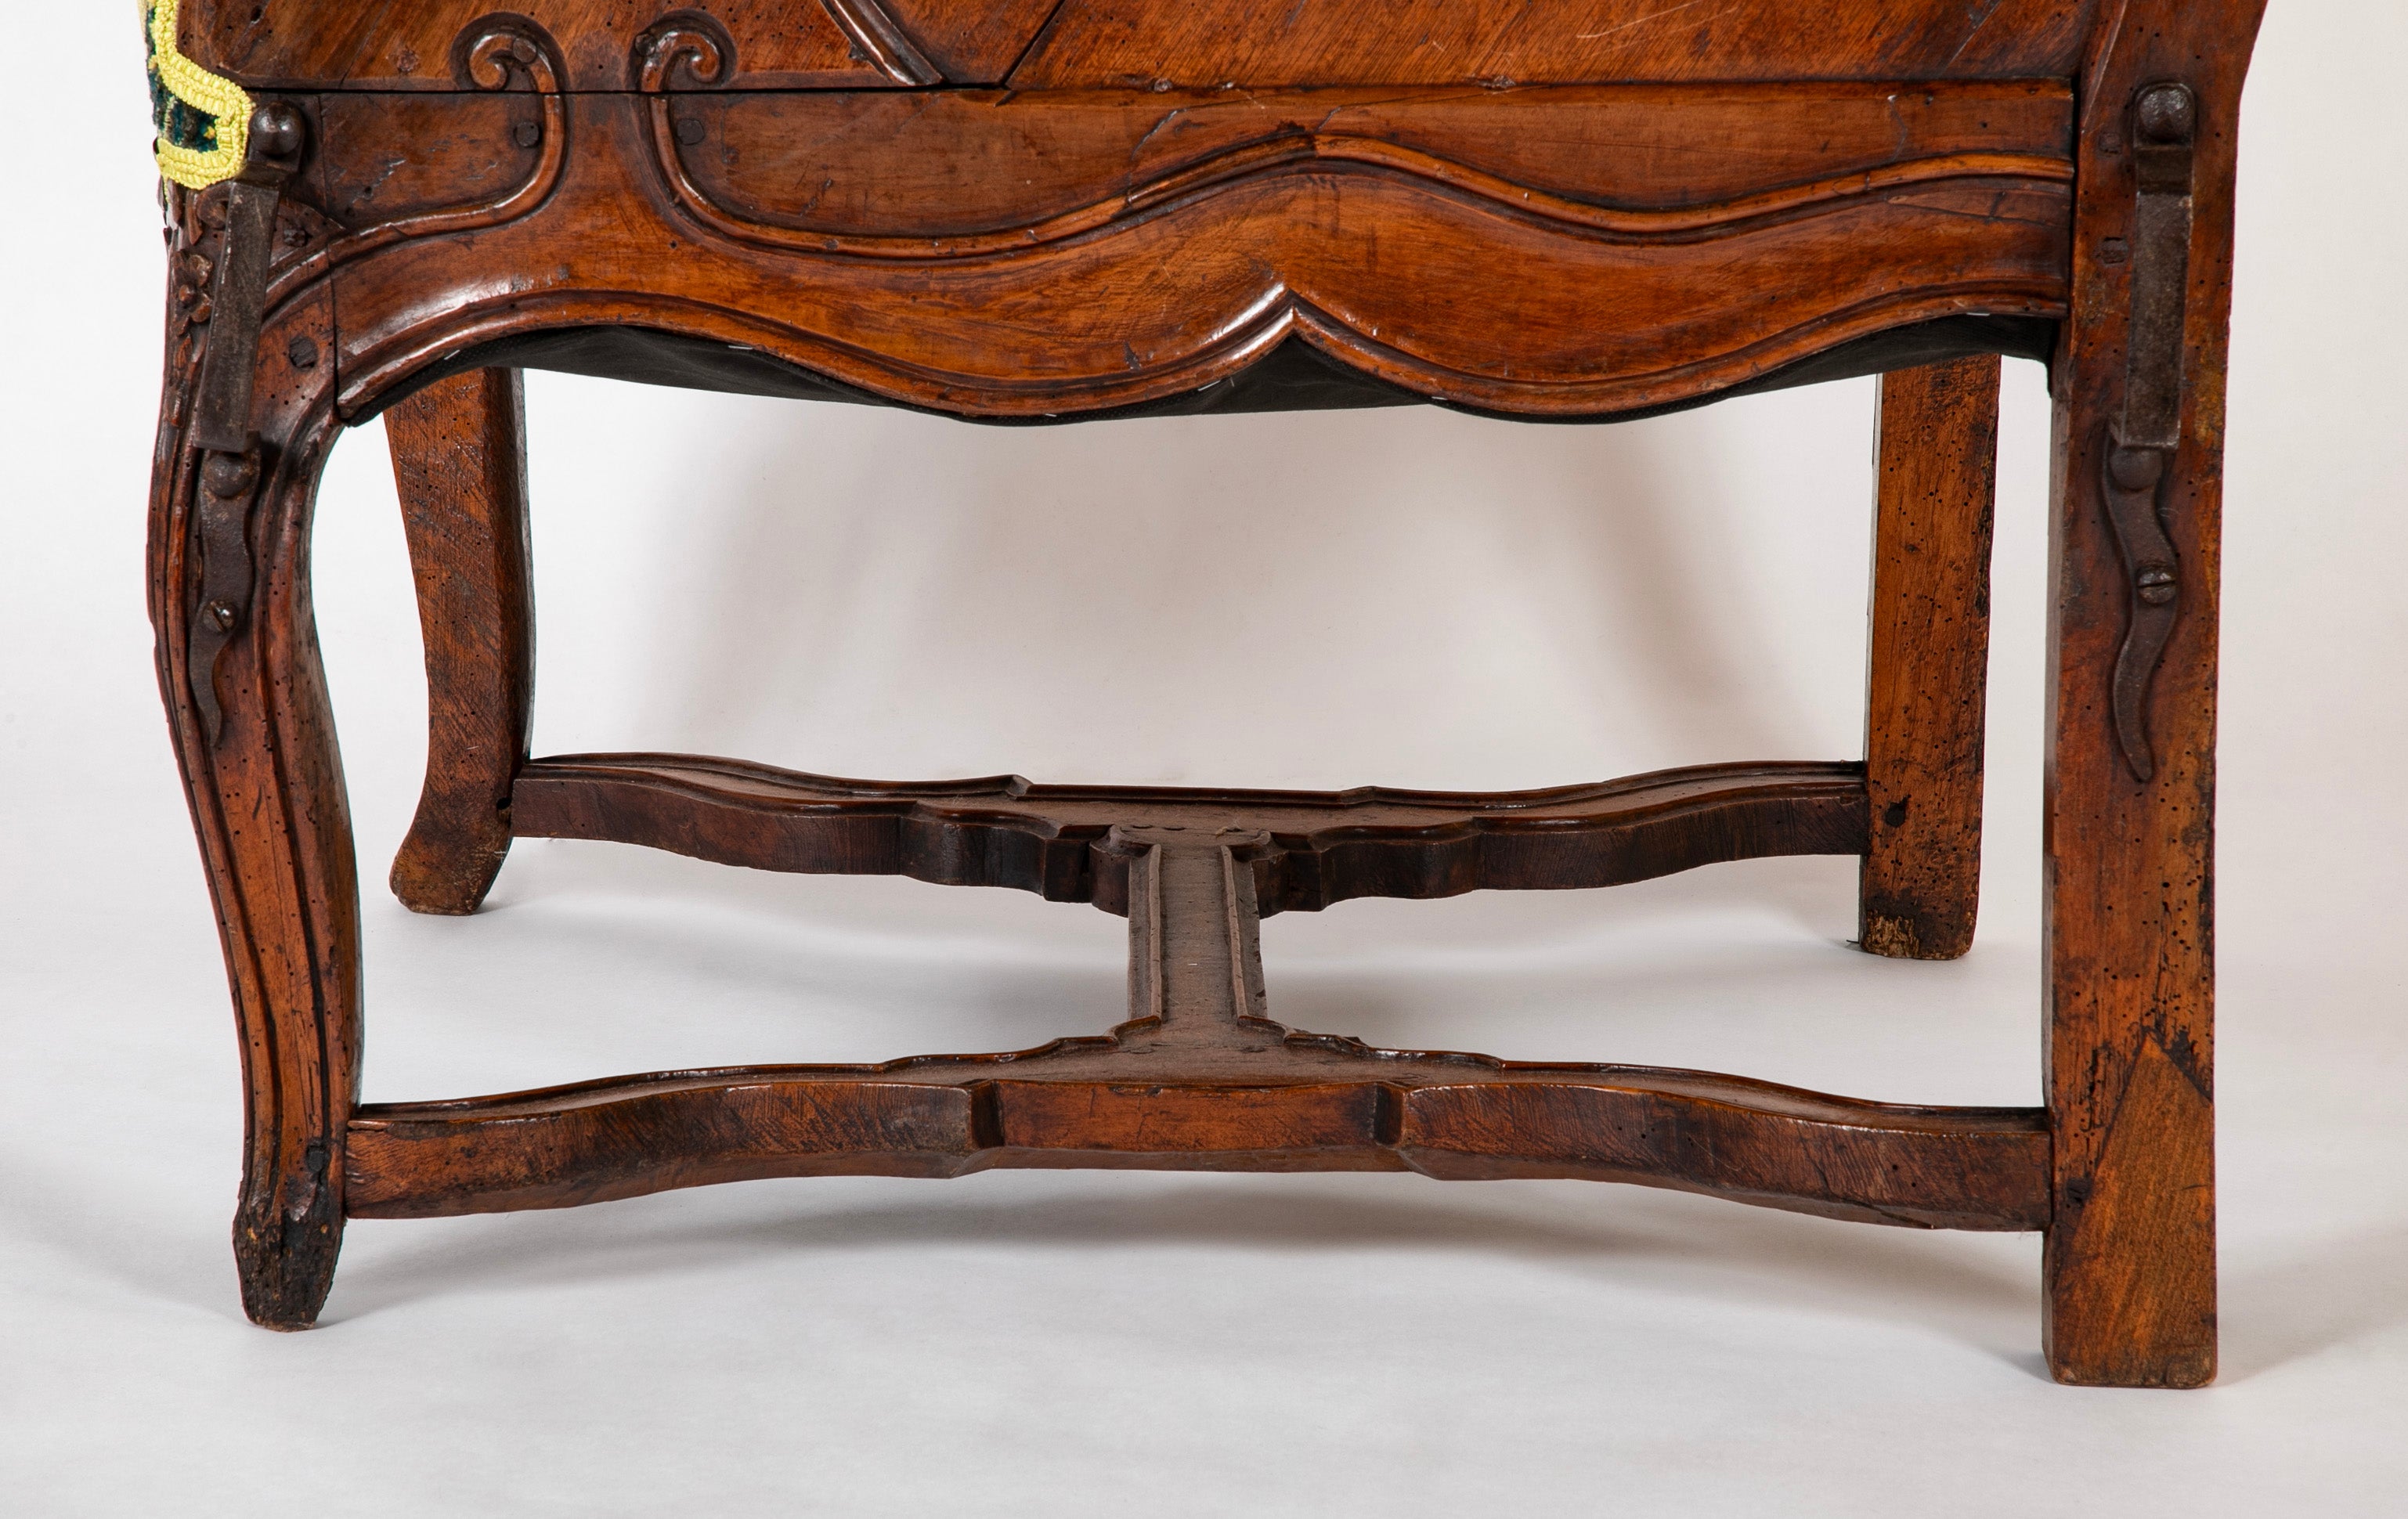 A Grand Scale French Louis XV Period Carved Walnut Armchair